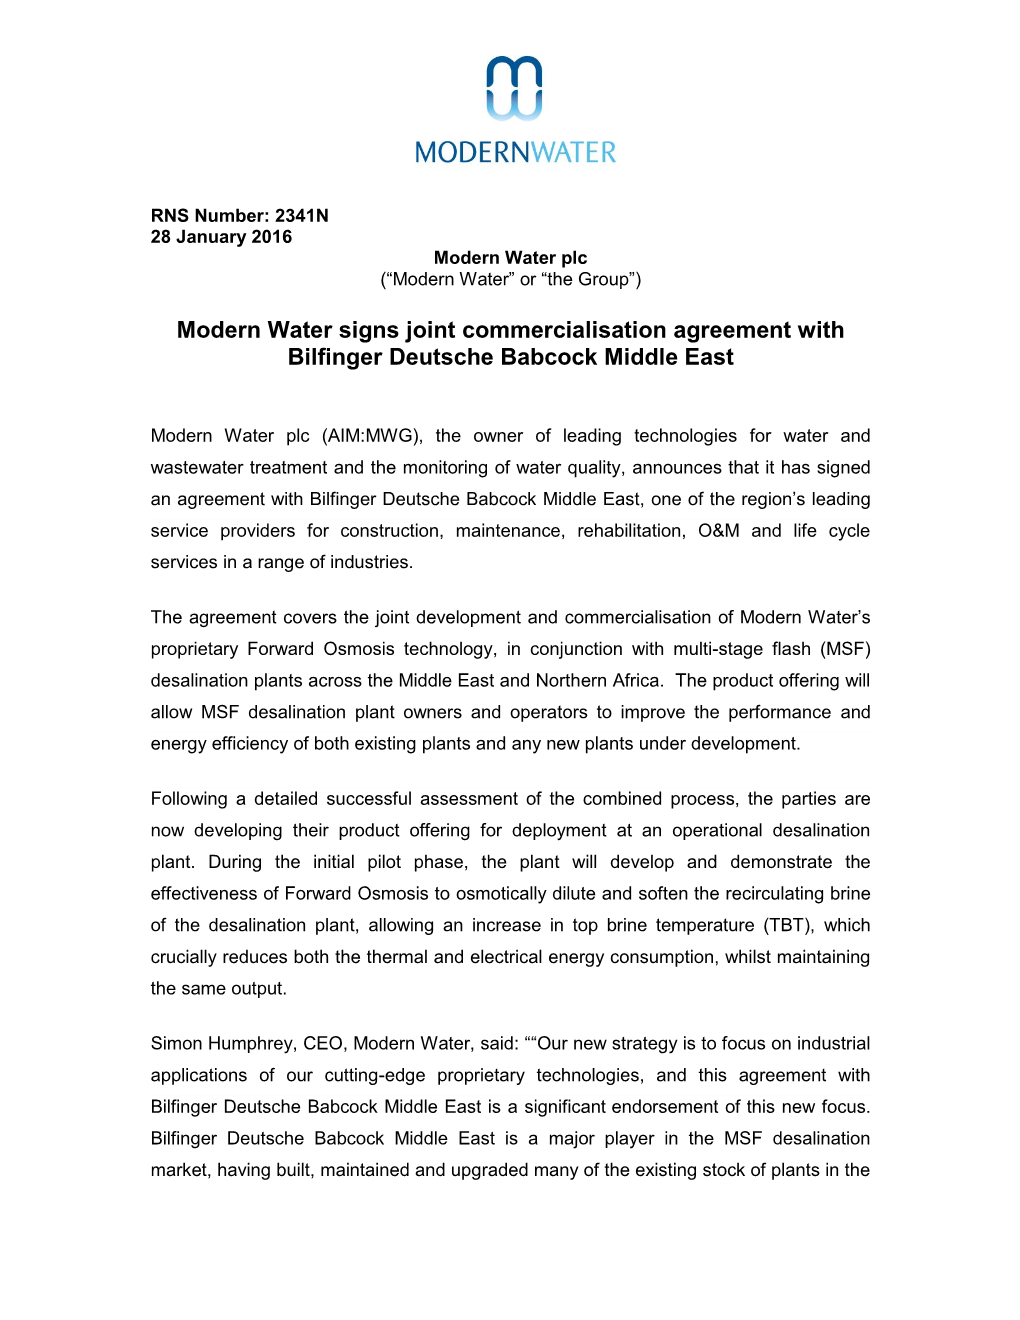 Modern Water Signs Joint Commercialisation Agreement with Bilfinger Deutsche Babcock Middle East